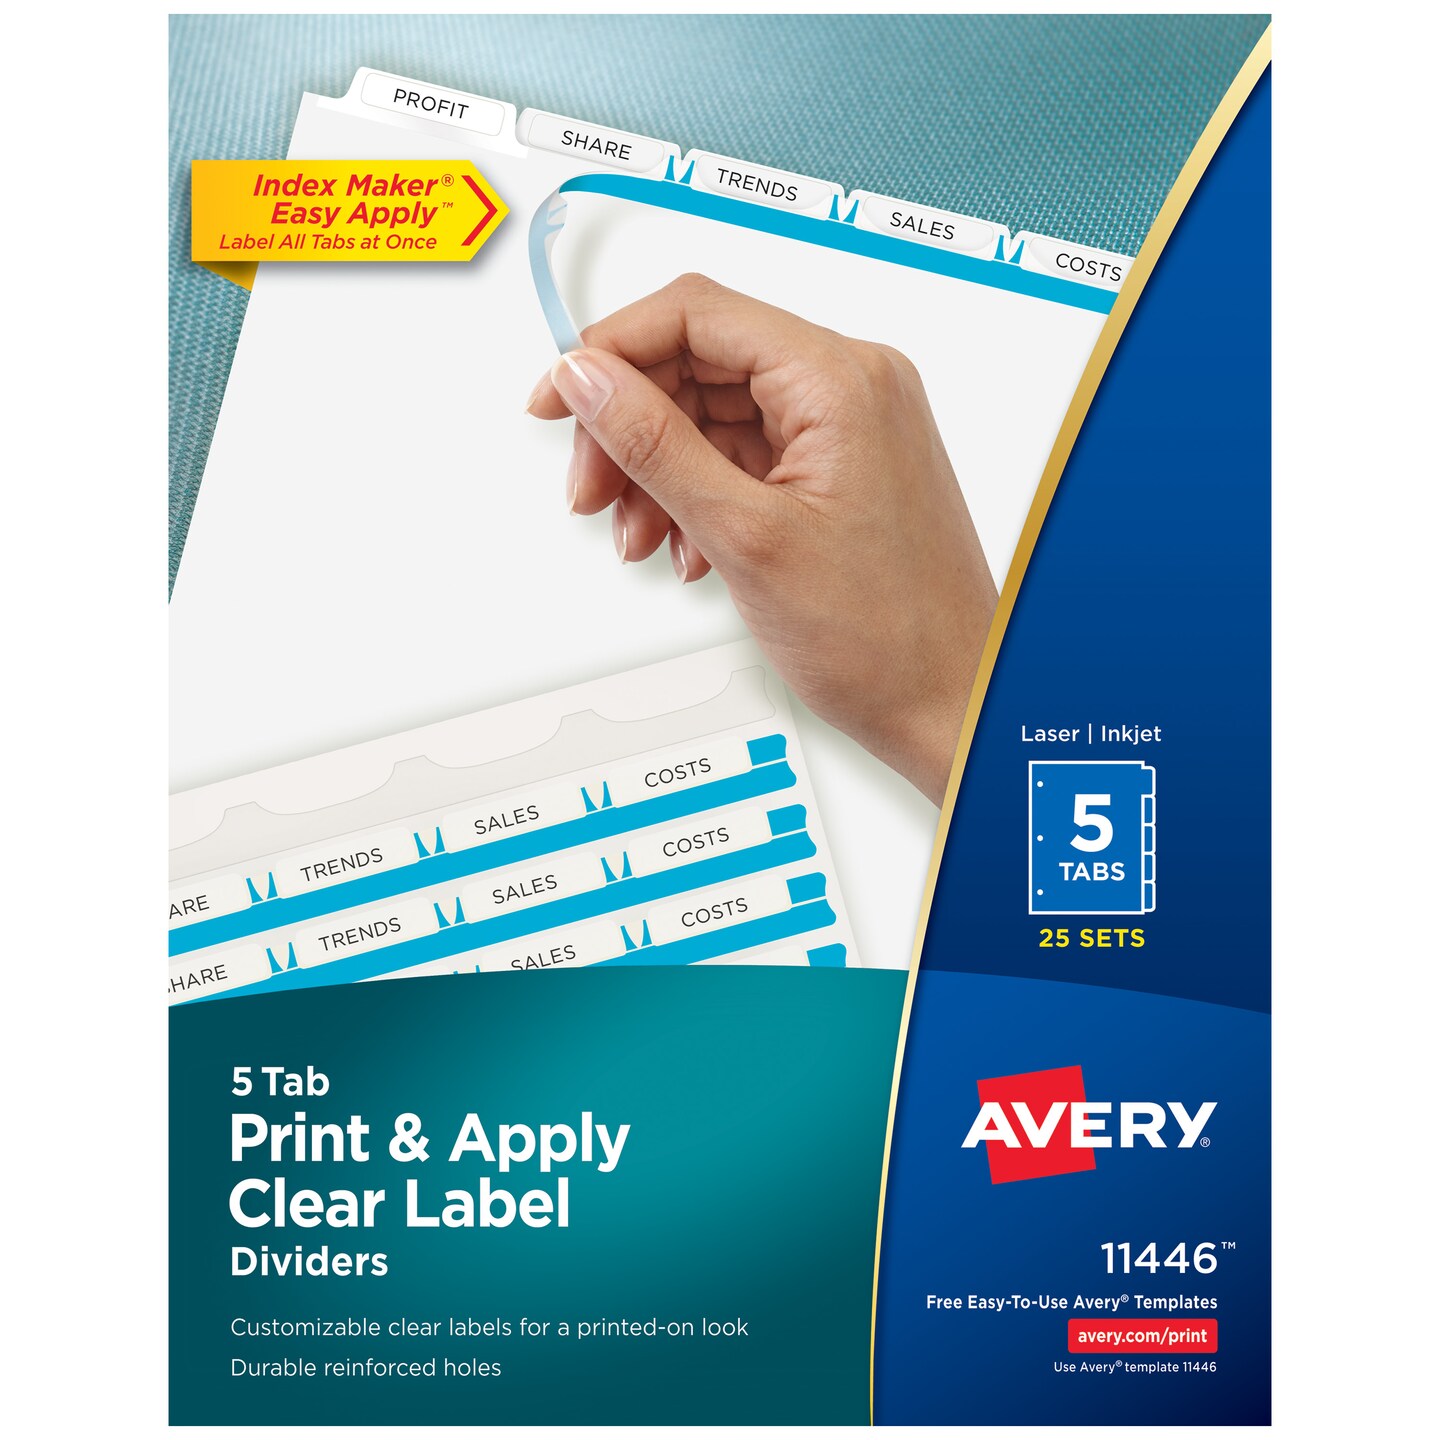 Avery 5 Tab Dividers for 3 Ring Binder, Easy Print &#x26; Apply Clear Label Strip, Index Maker Customizable White Tabs, 25 Sets (11446)